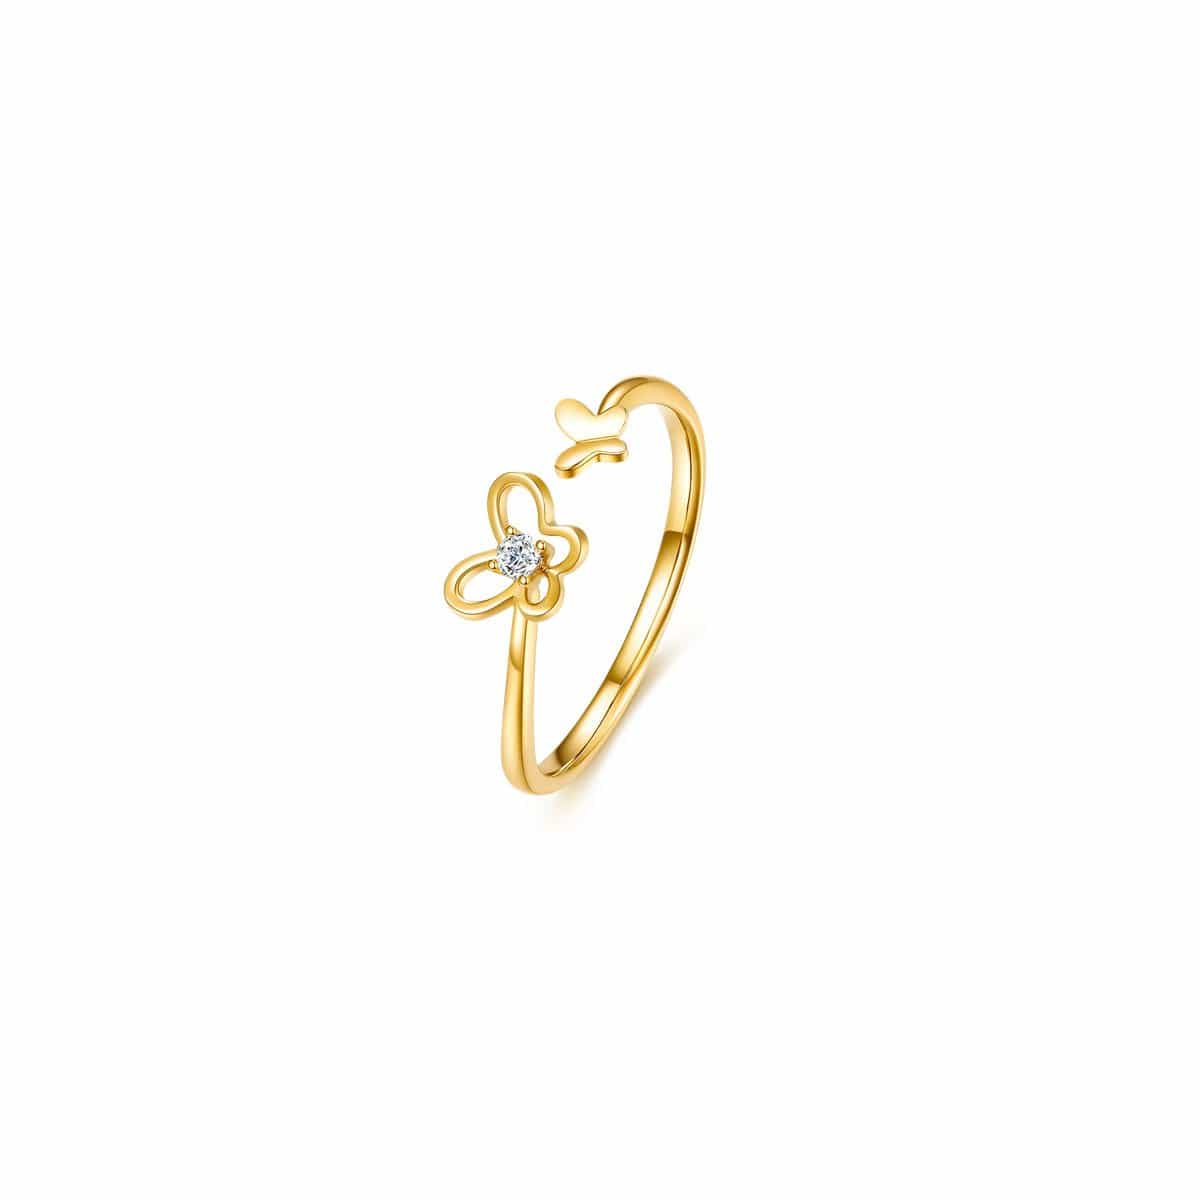 FANCIME "Golden Wings" Diamond  Butterfly 14K Yellow Gold Ring Main